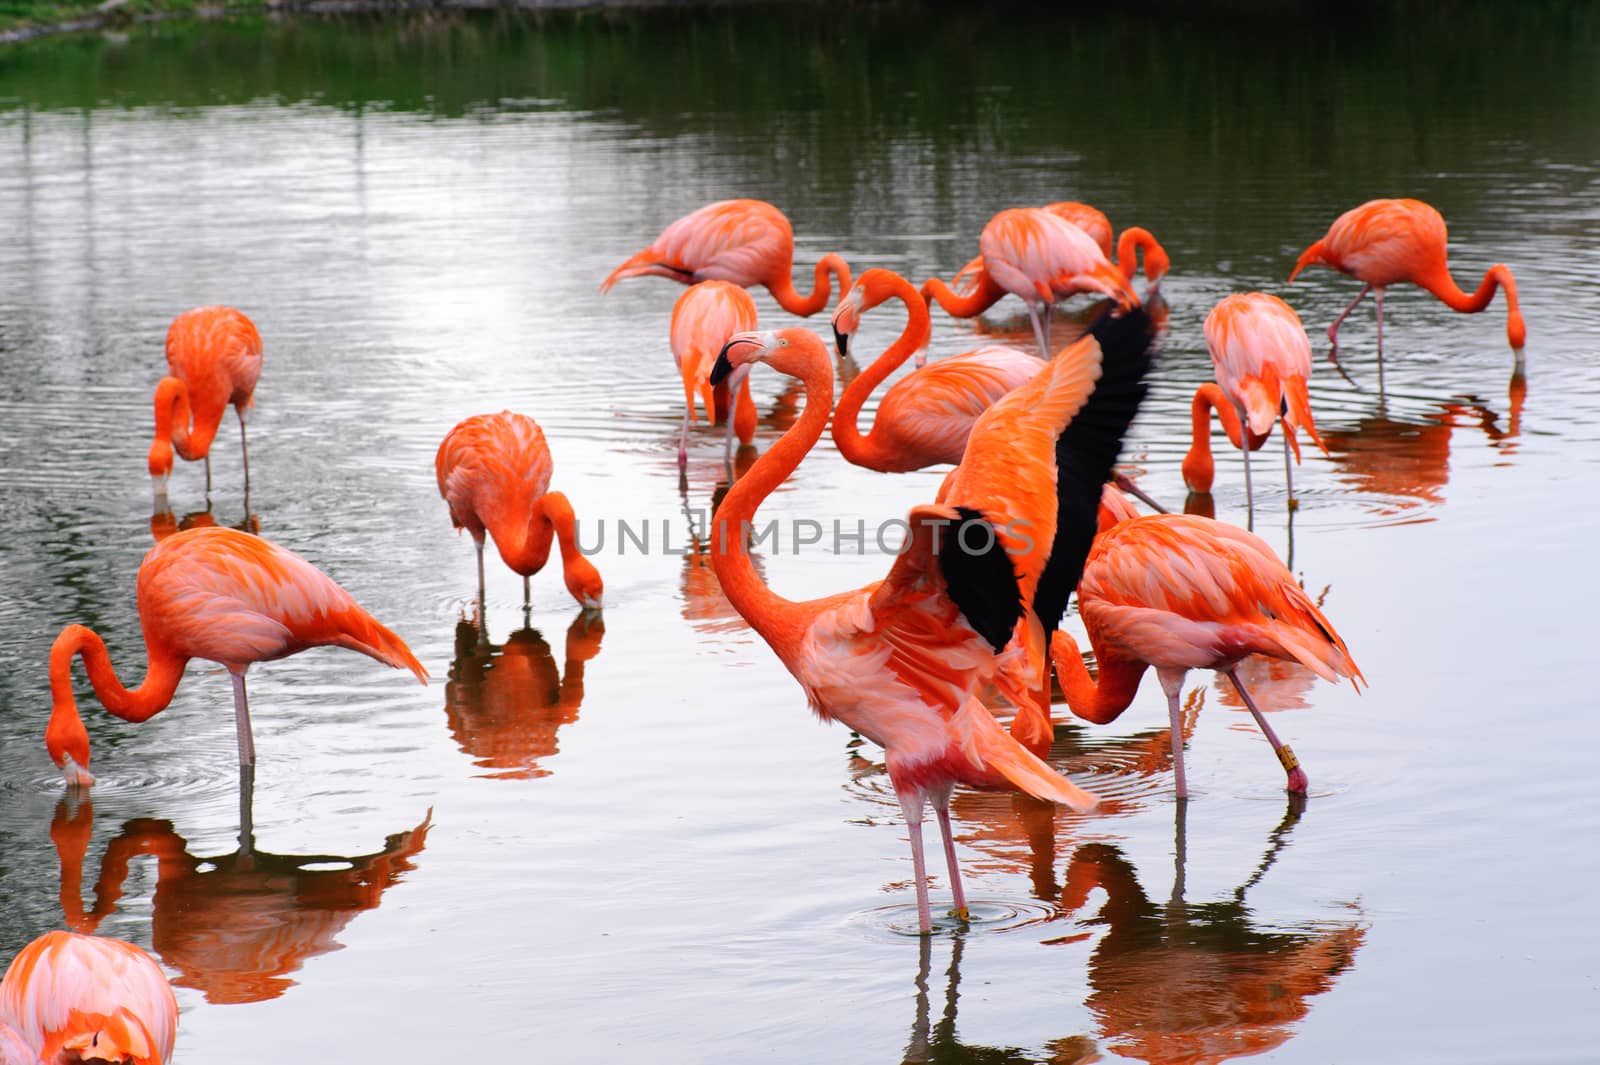 A group of flamingos in a pool feeding and flapping wings